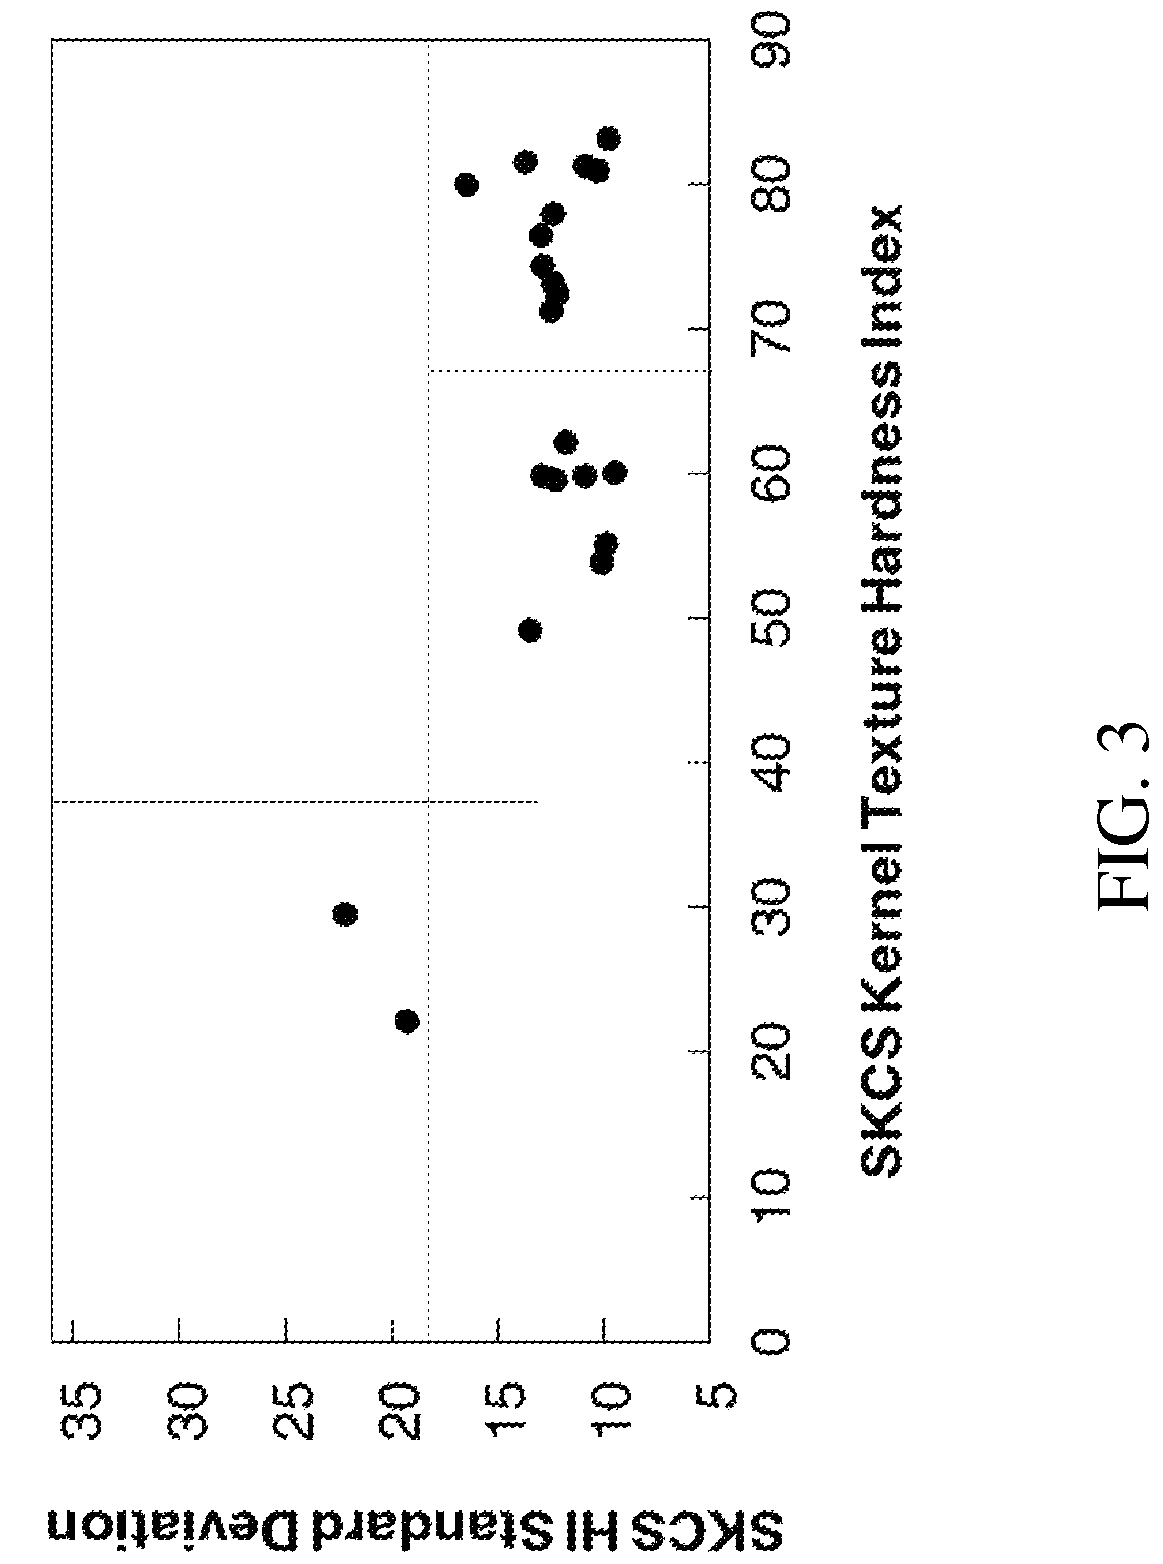 Non-transgenic soft textured tetraploid wheat plants having grain with soft textured endosperm, endosperm therefrom and uses thereof